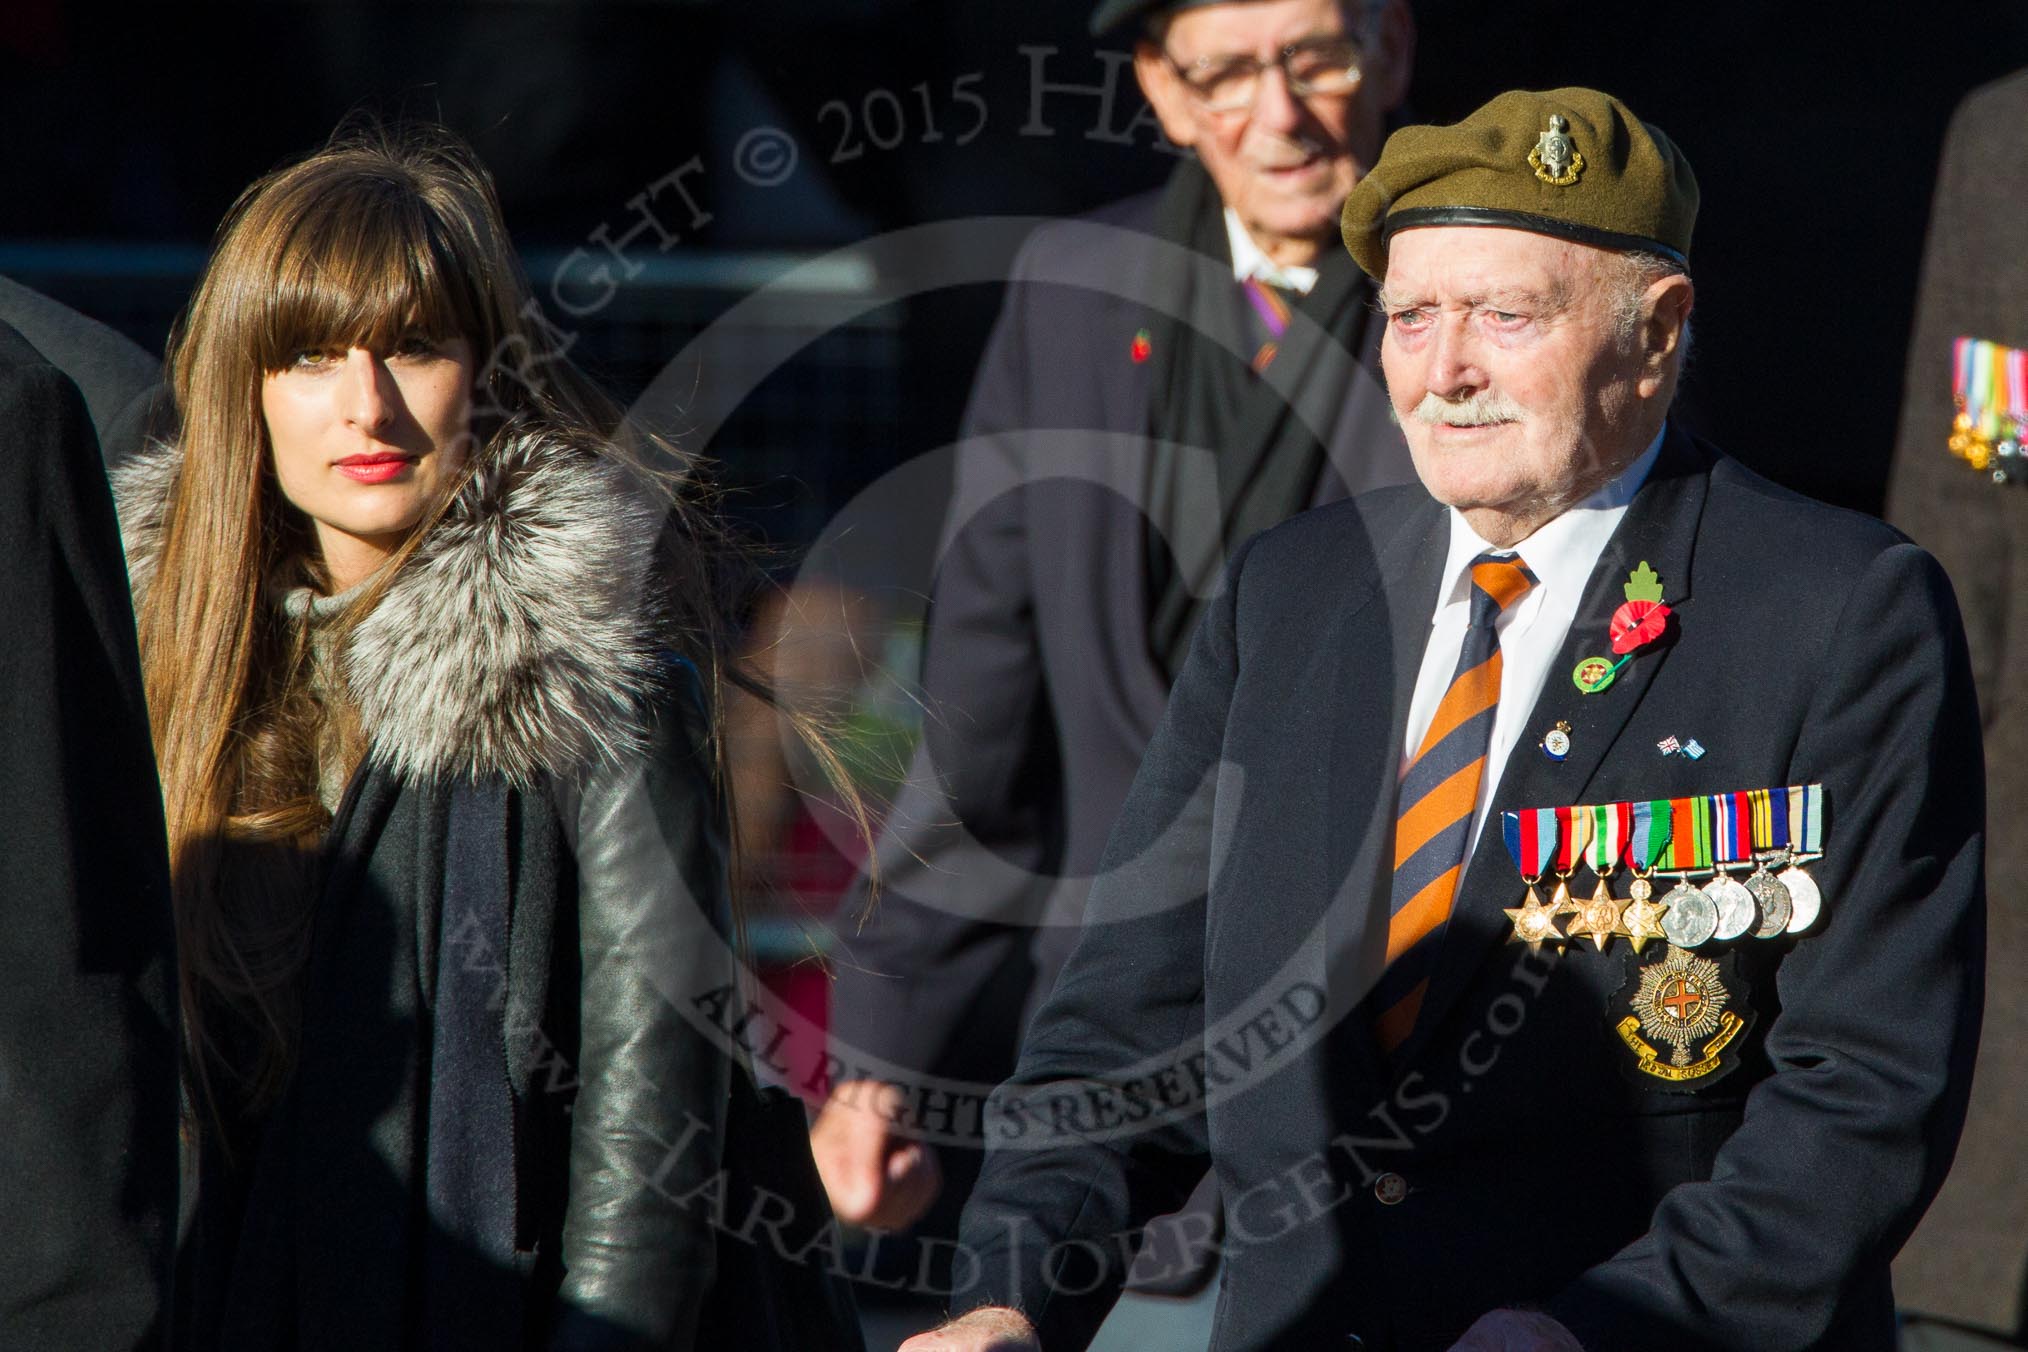 Remembrance Sunday Cenotaph March Past 2013: A33 - Royal Sussex Regimental Association..
Press stand opposite the Foreign Office building, Whitehall, London SW1,
London,
Greater London,
United Kingdom,
on 10 November 2013 at 11:58, image #1293